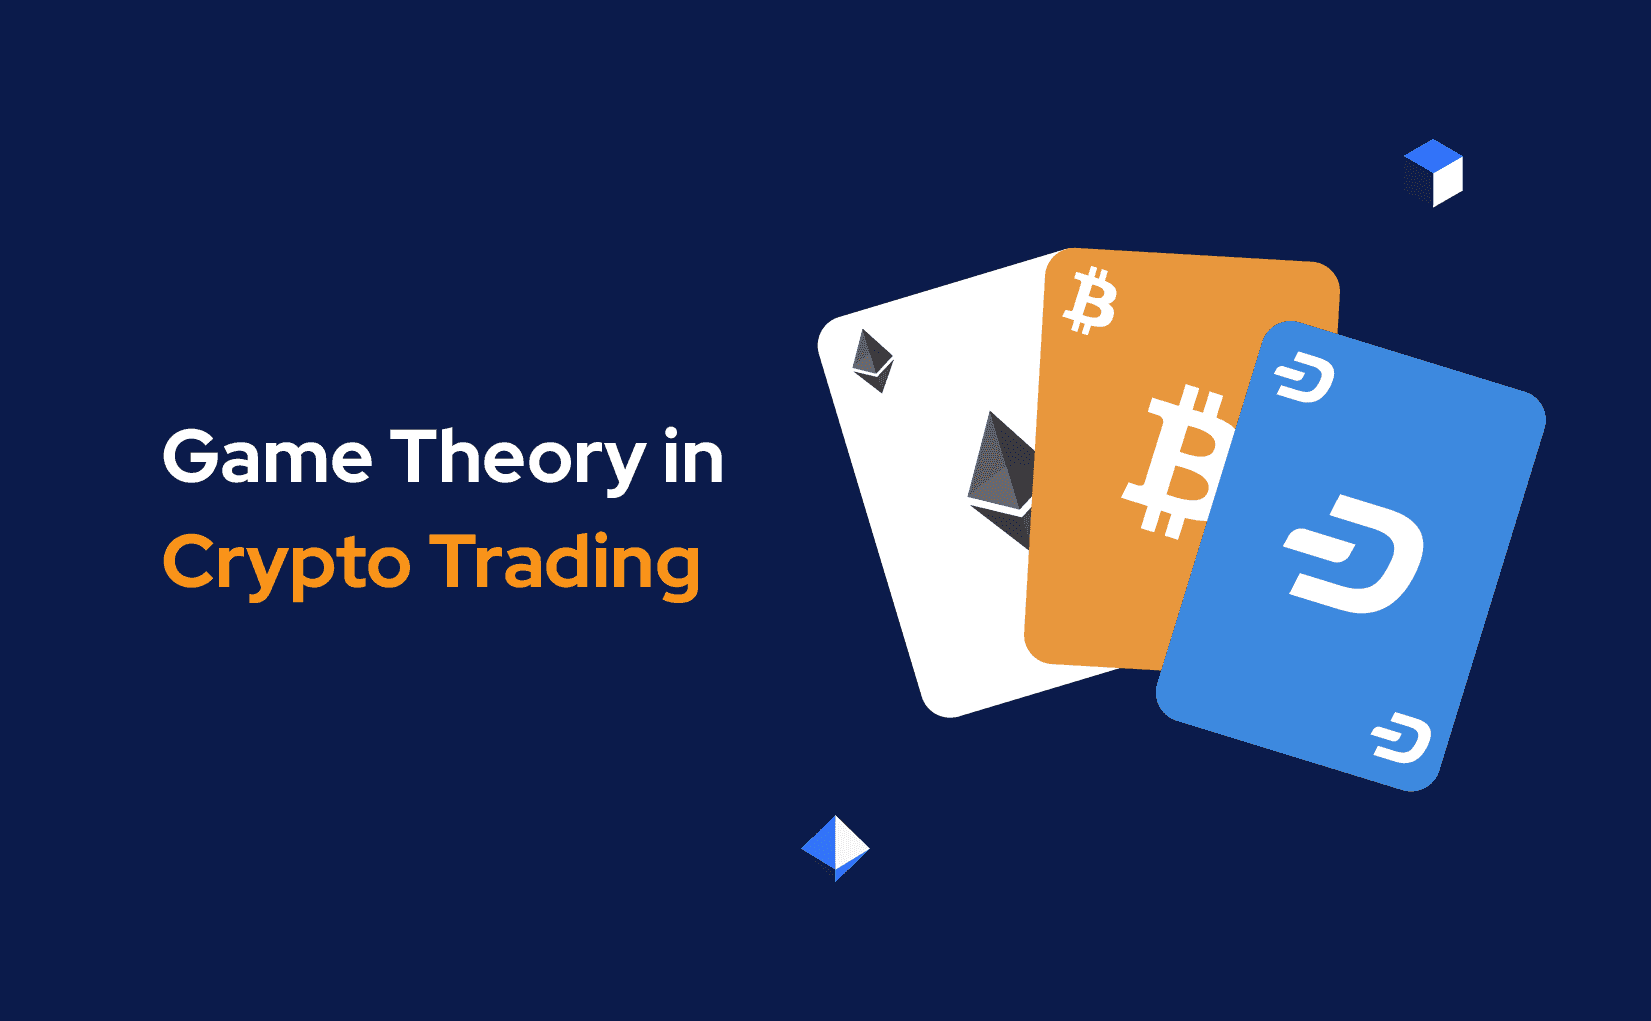 Game Theory in Crypto Trading